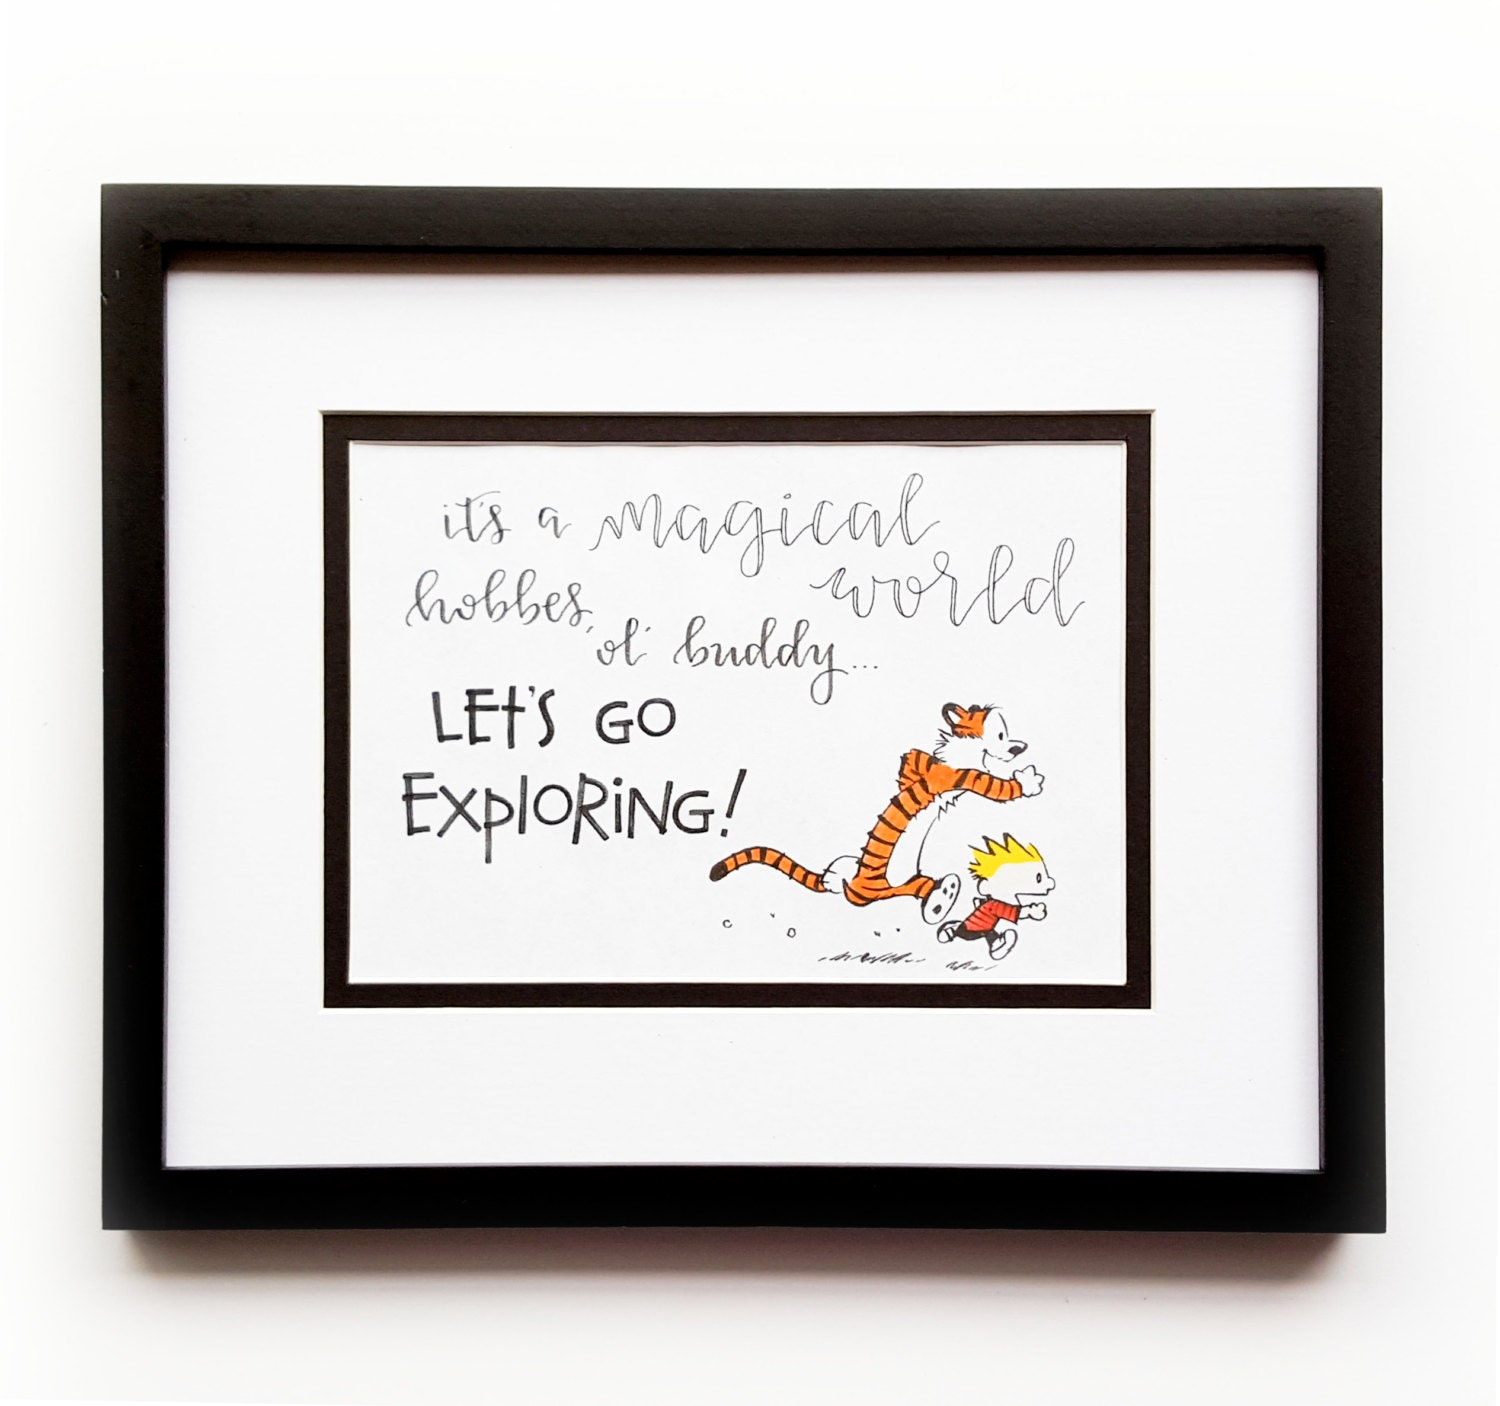 calvin and hobbes it